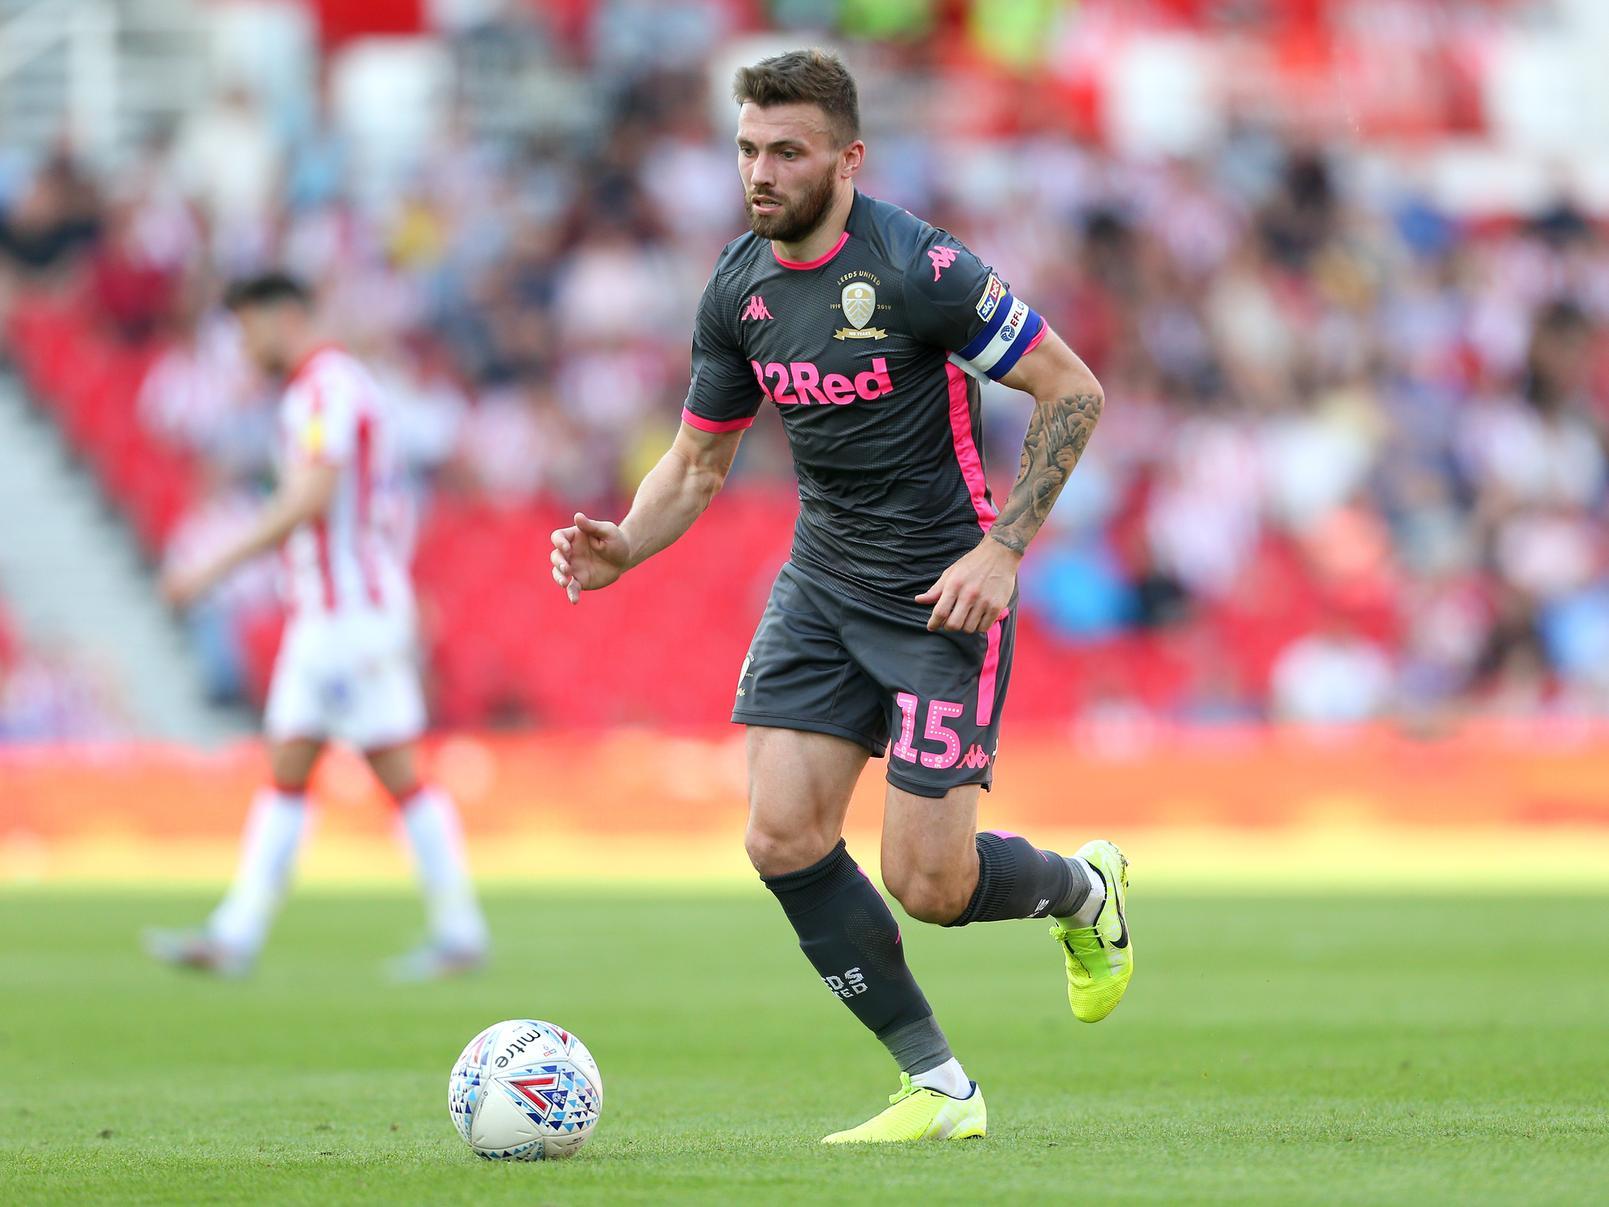 Dallas was an injury worry after picking up a calf problem late last week, but he's passed fit and is expected to start. Will have a job on against QPR's creative midfield.